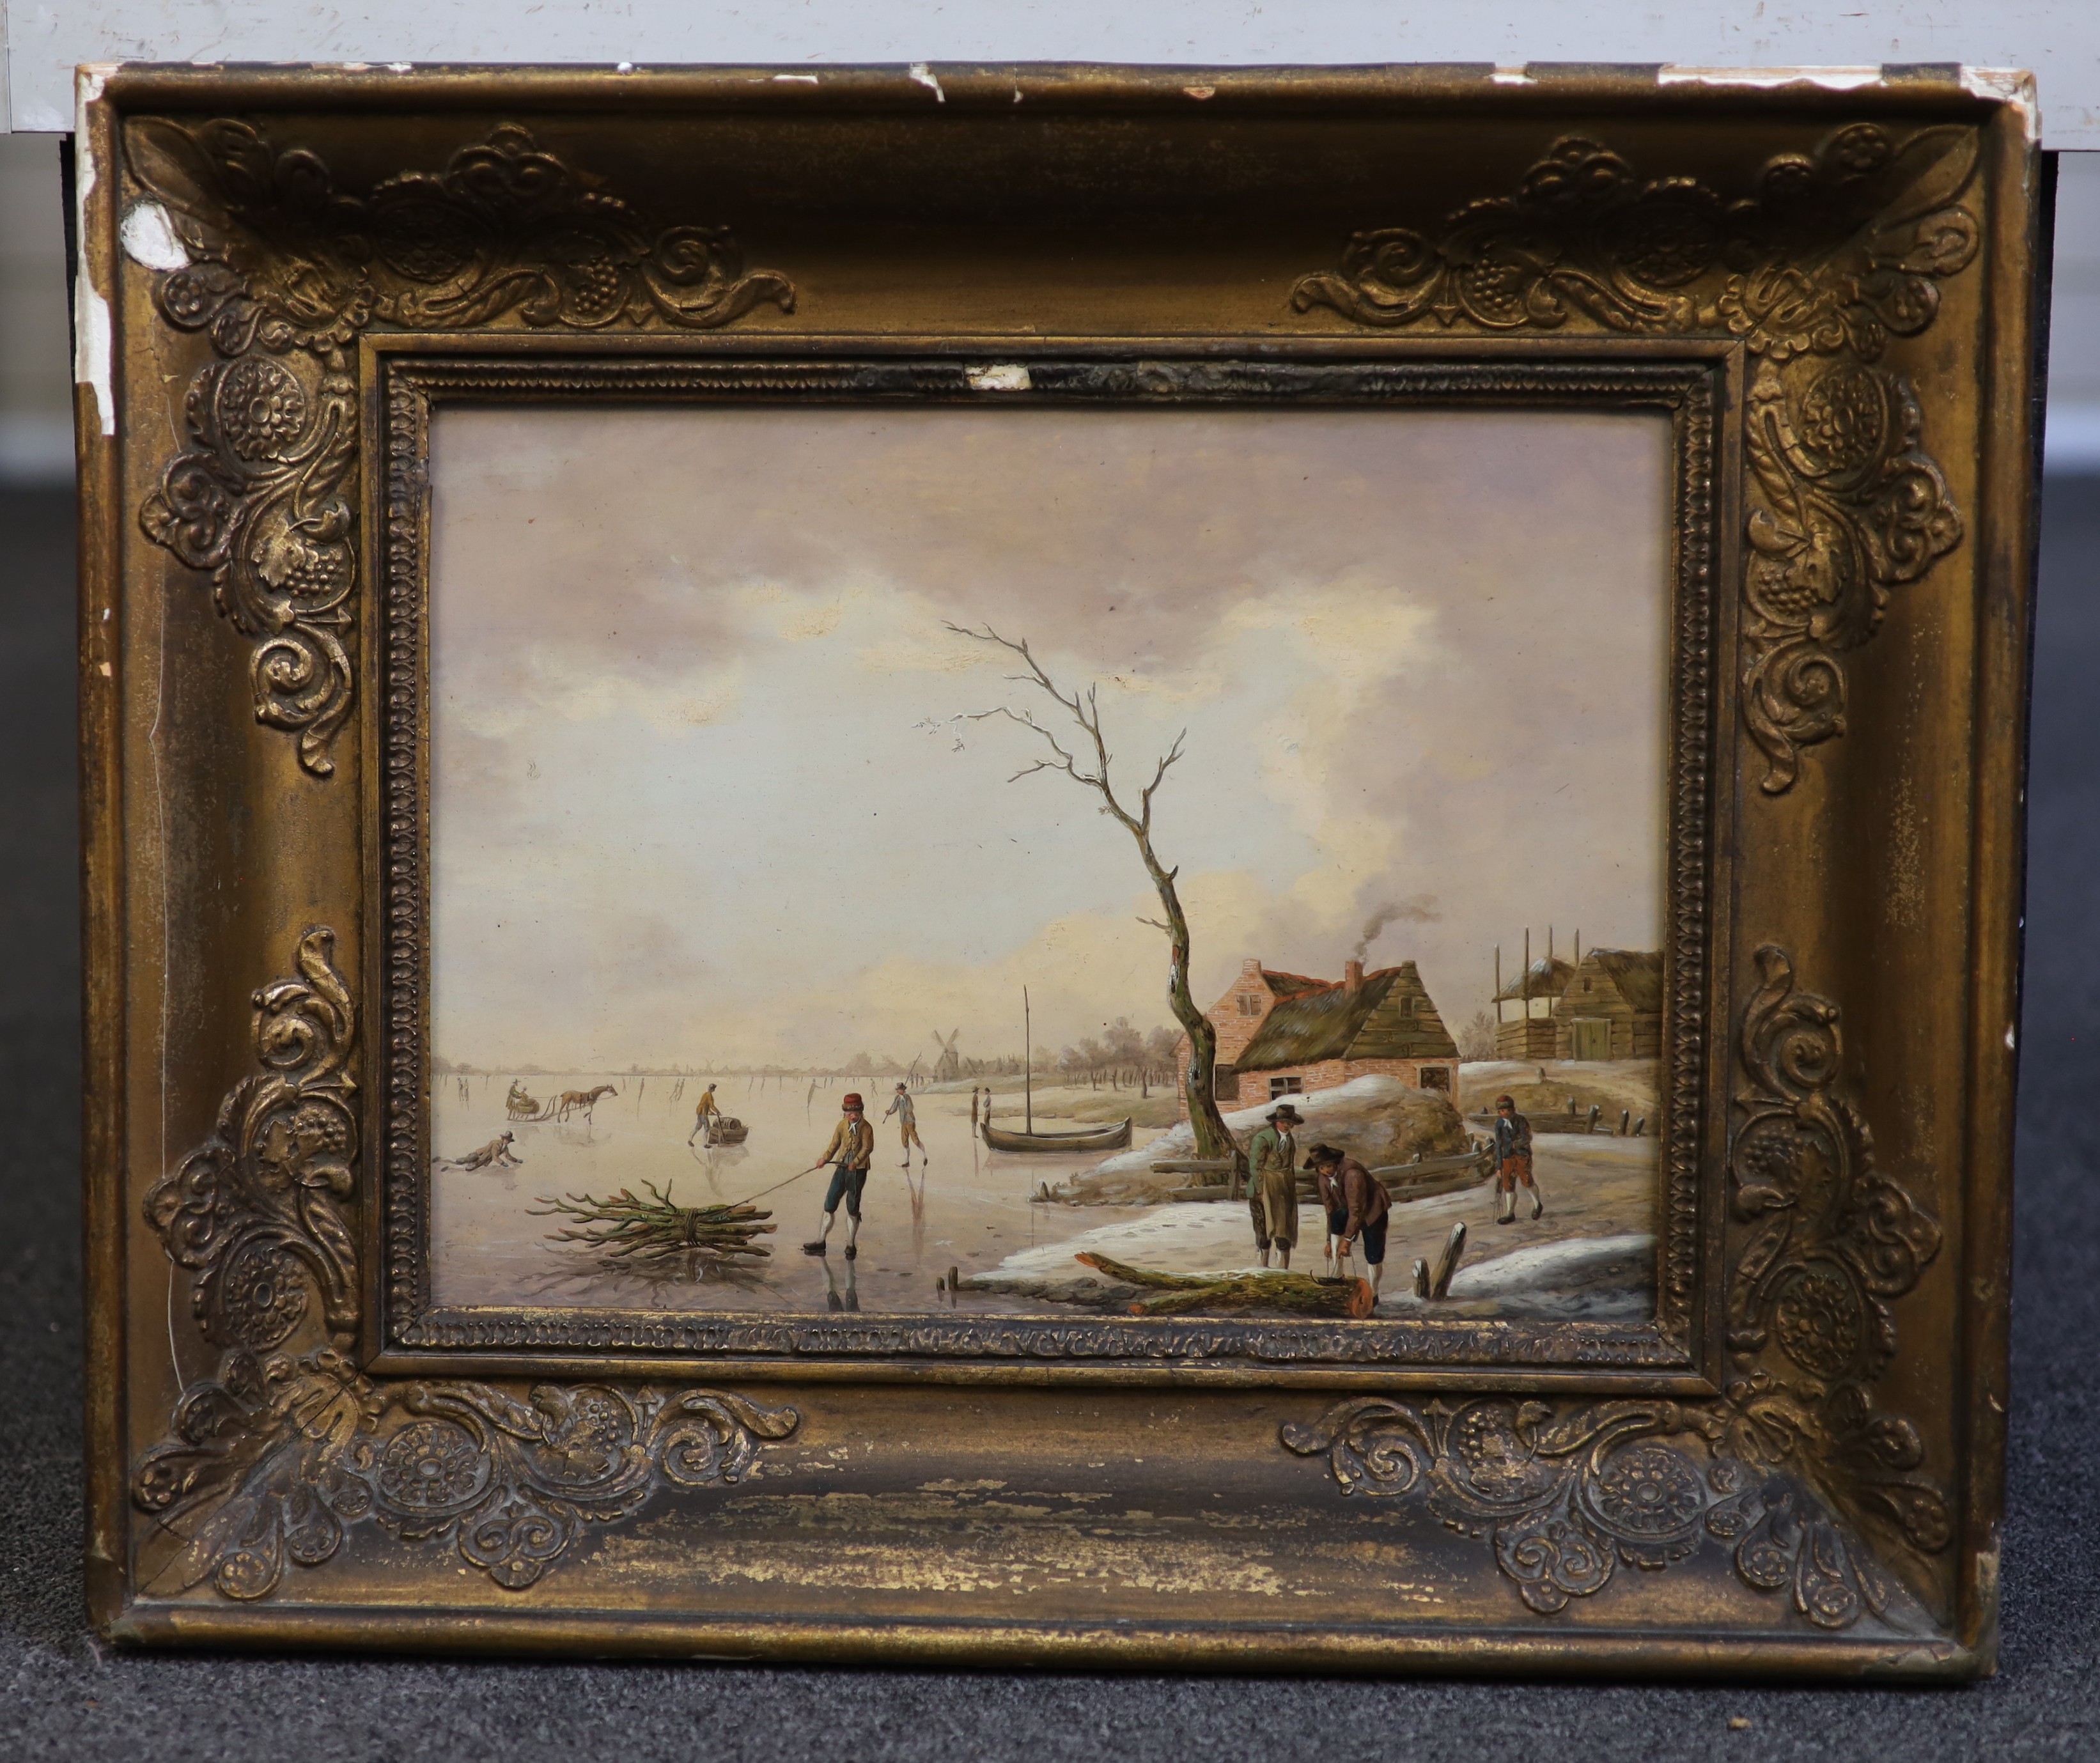 Attributed to Hendrik Willem Schweickhardt (German, 1746-1797), Winter landscape with skaters on the ice, oil on wooden panel, 23 x 31cm